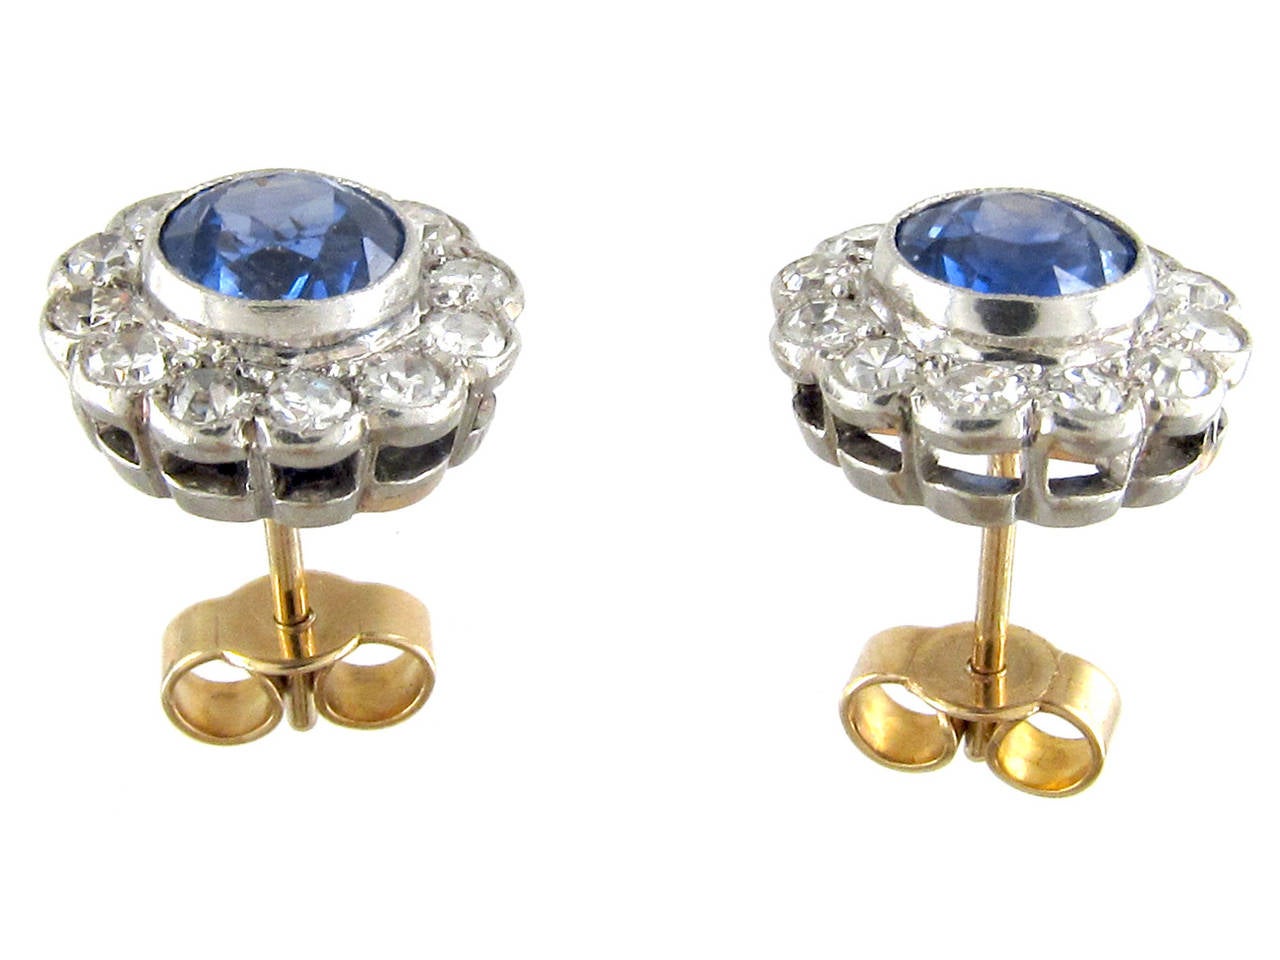 The well matched cornflower blue sapphires really make these earrings special. The diamonds are bright and the platinum work is finely executed. They were made circa 1910-1920.